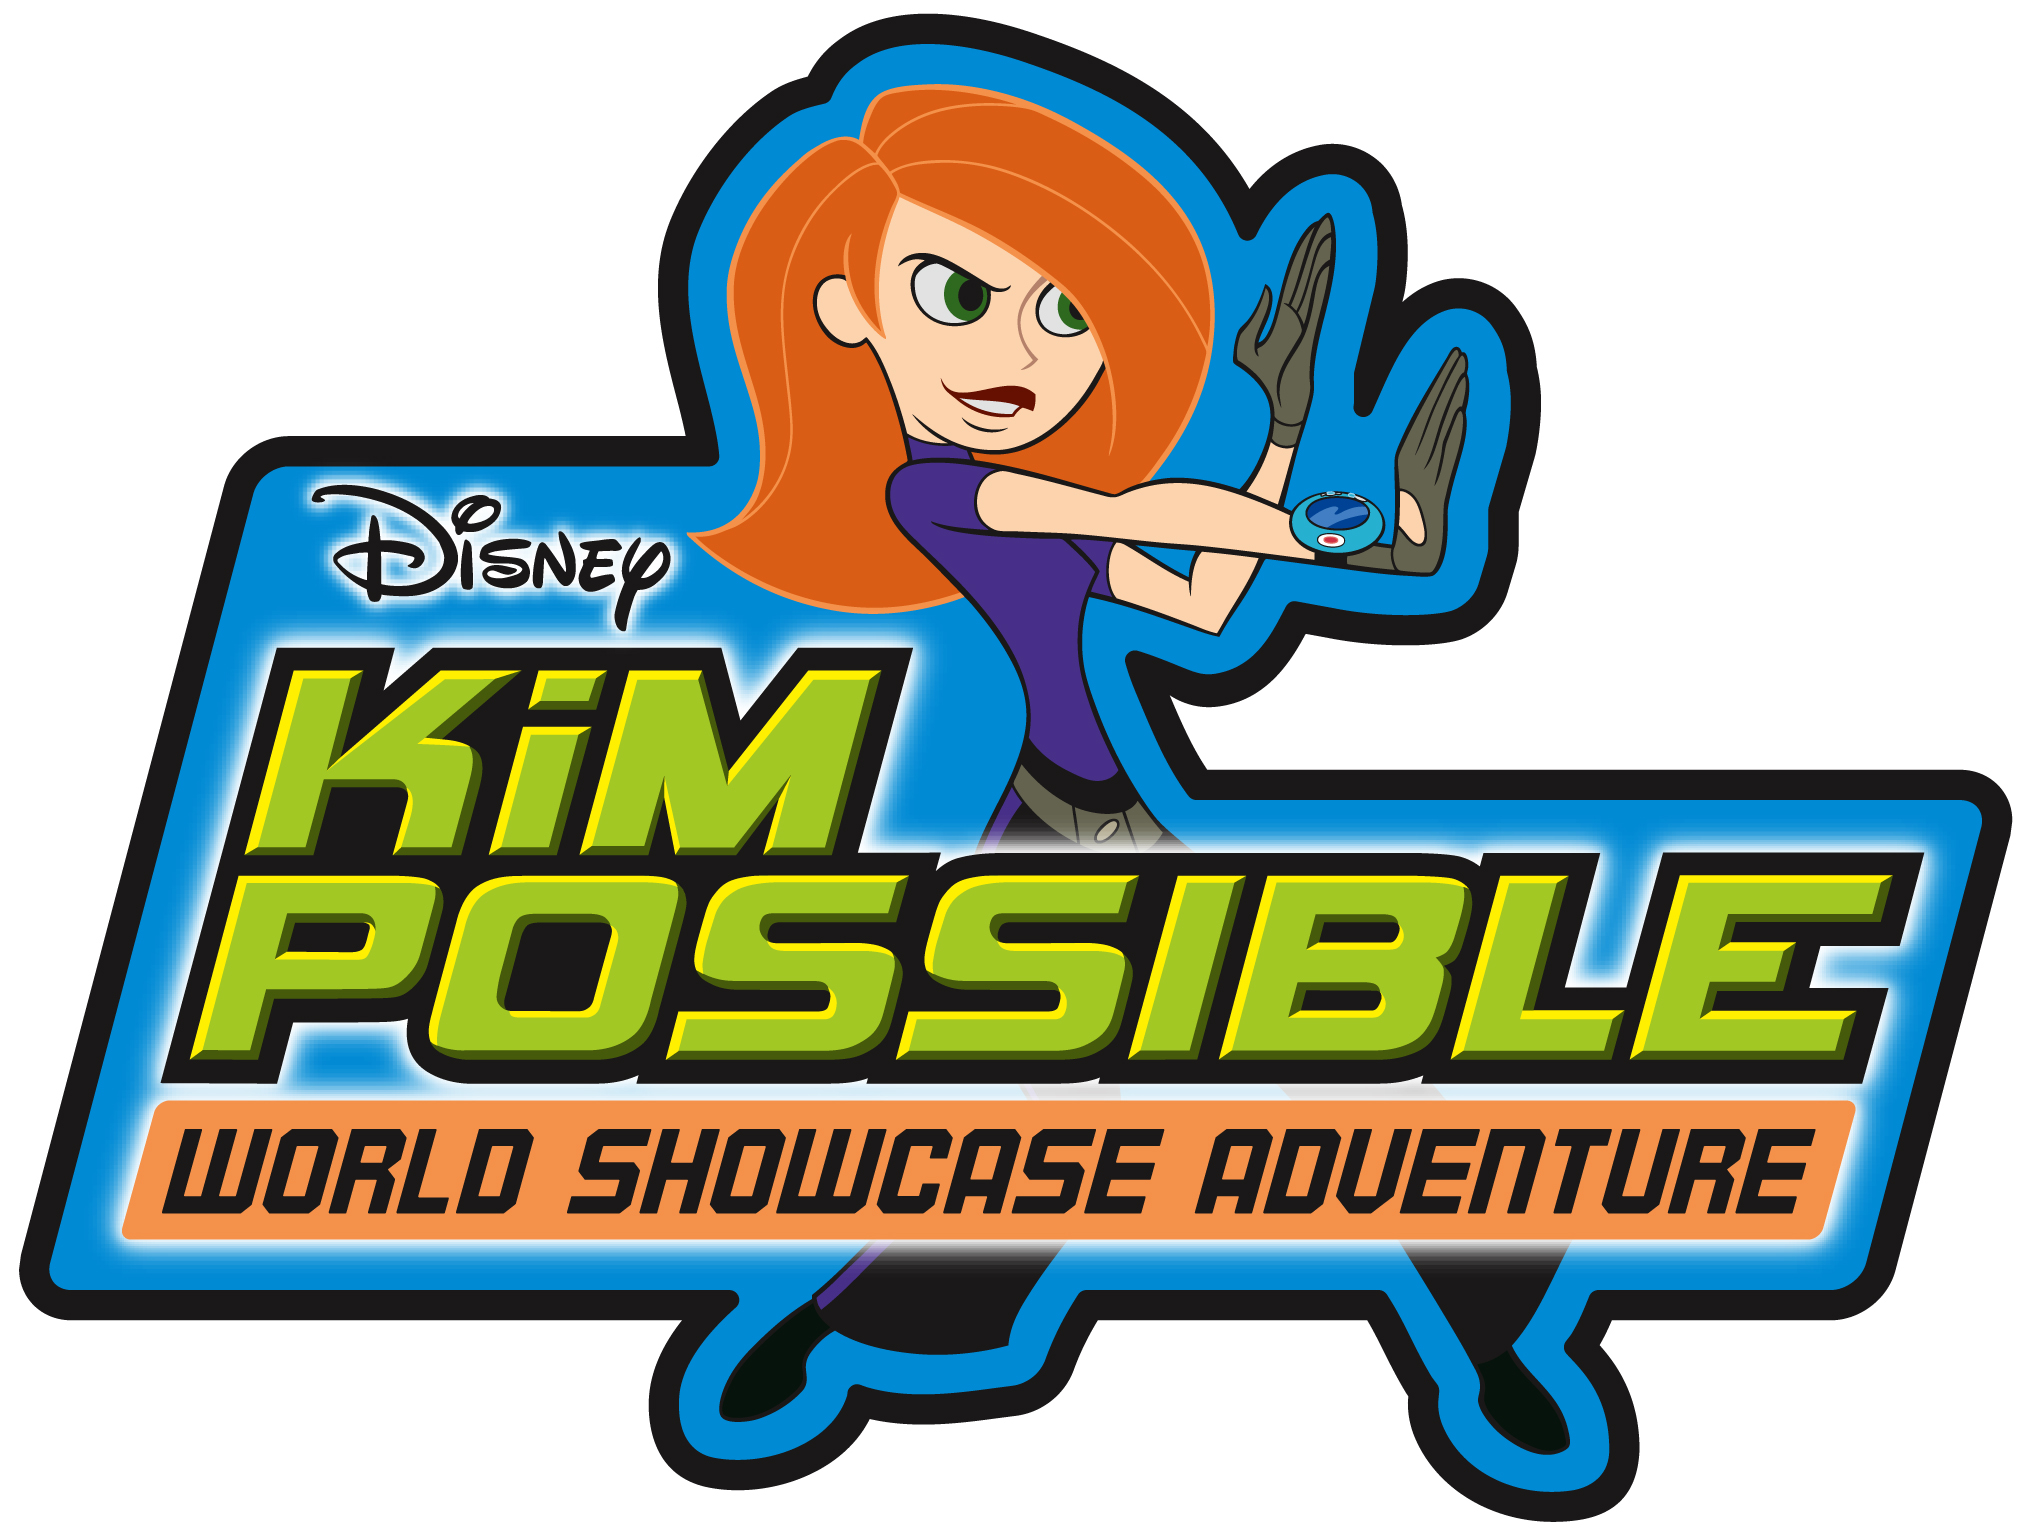 Agent P vs Kim Possible Was change really needed?